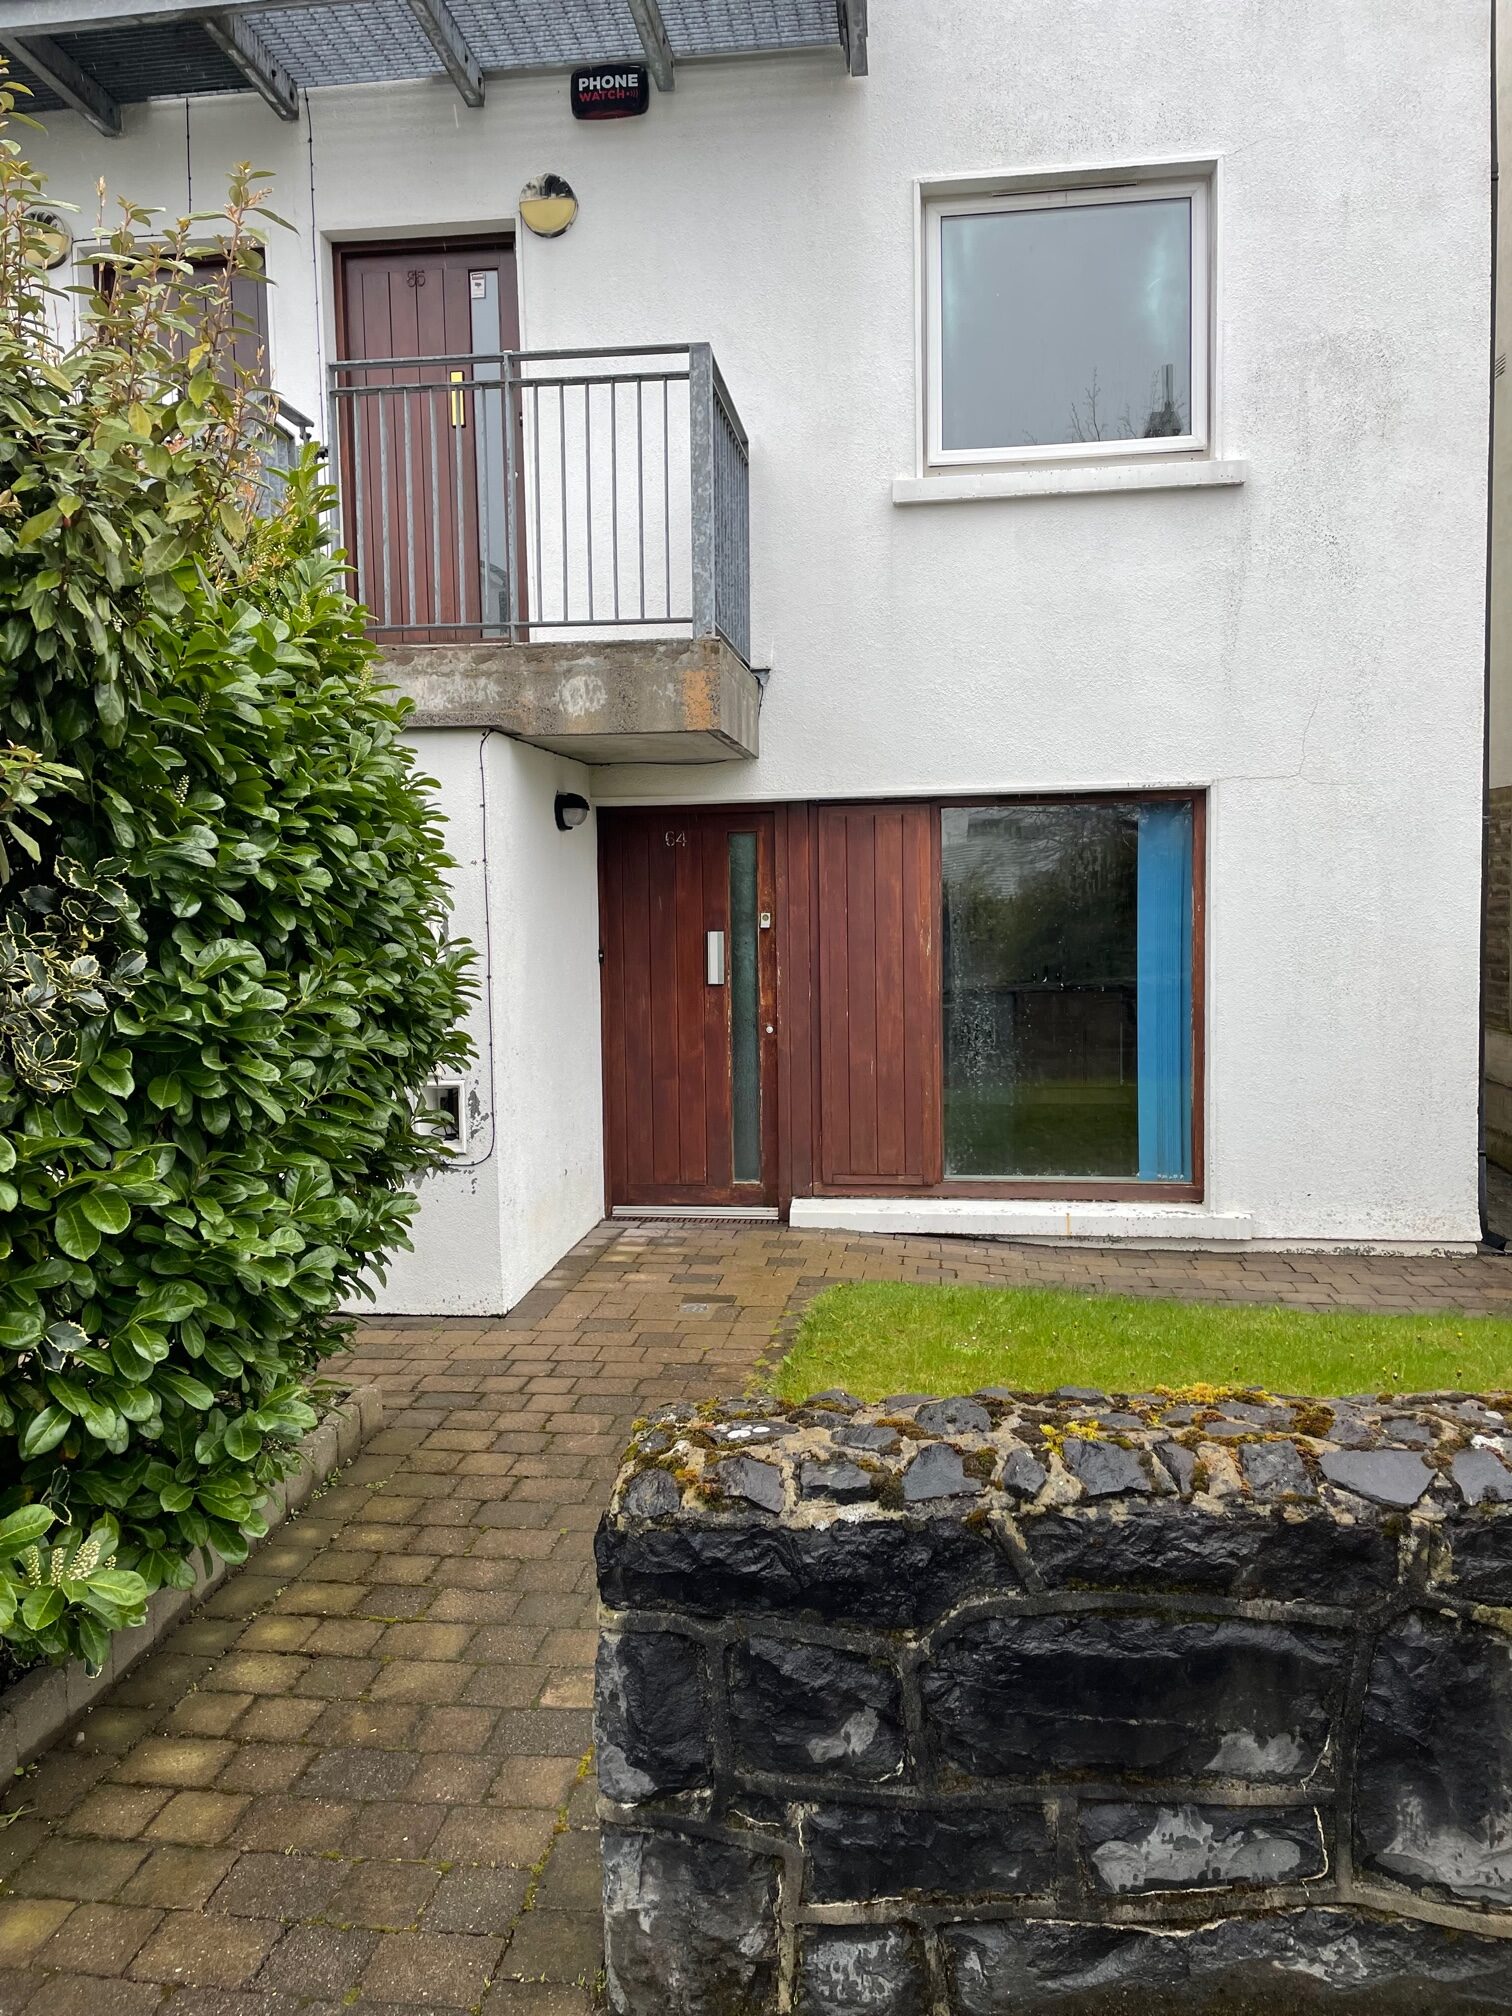 64 Sáilín, Wellpark, Galway City, Co. Galway